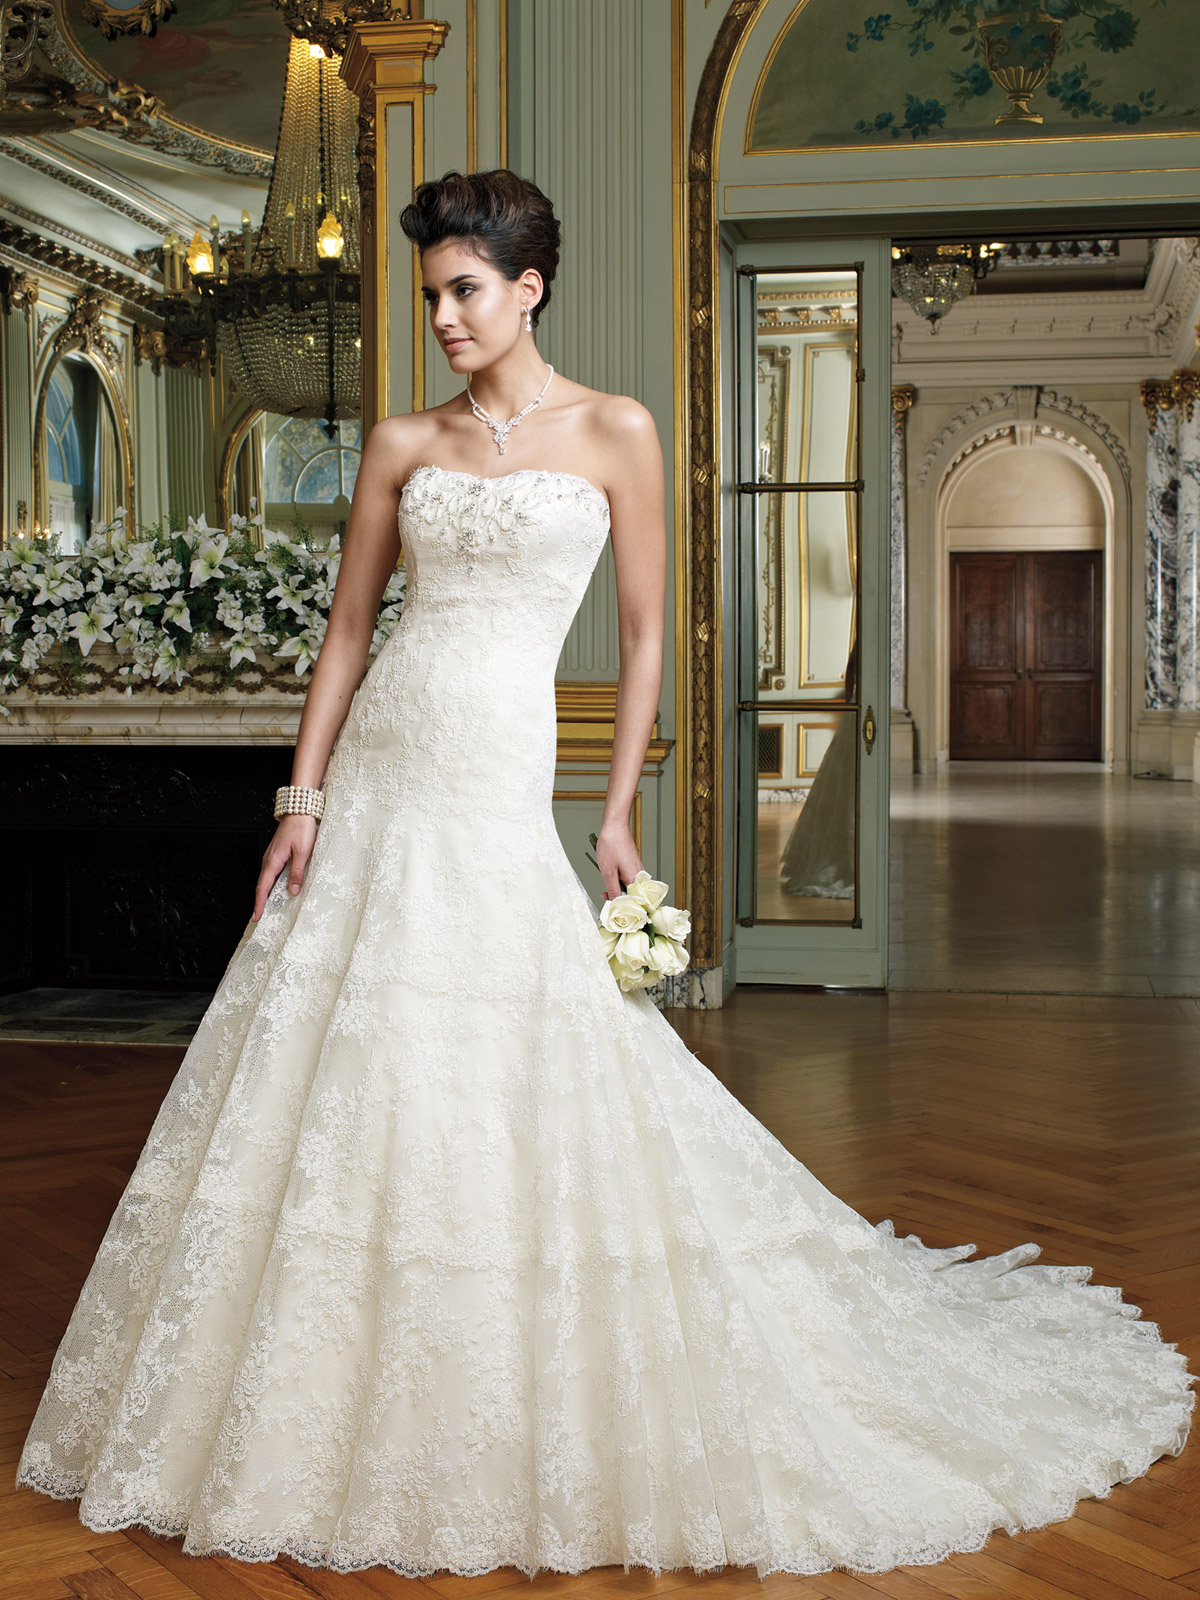 The Ultimate Guide to Wedding Gown Trains